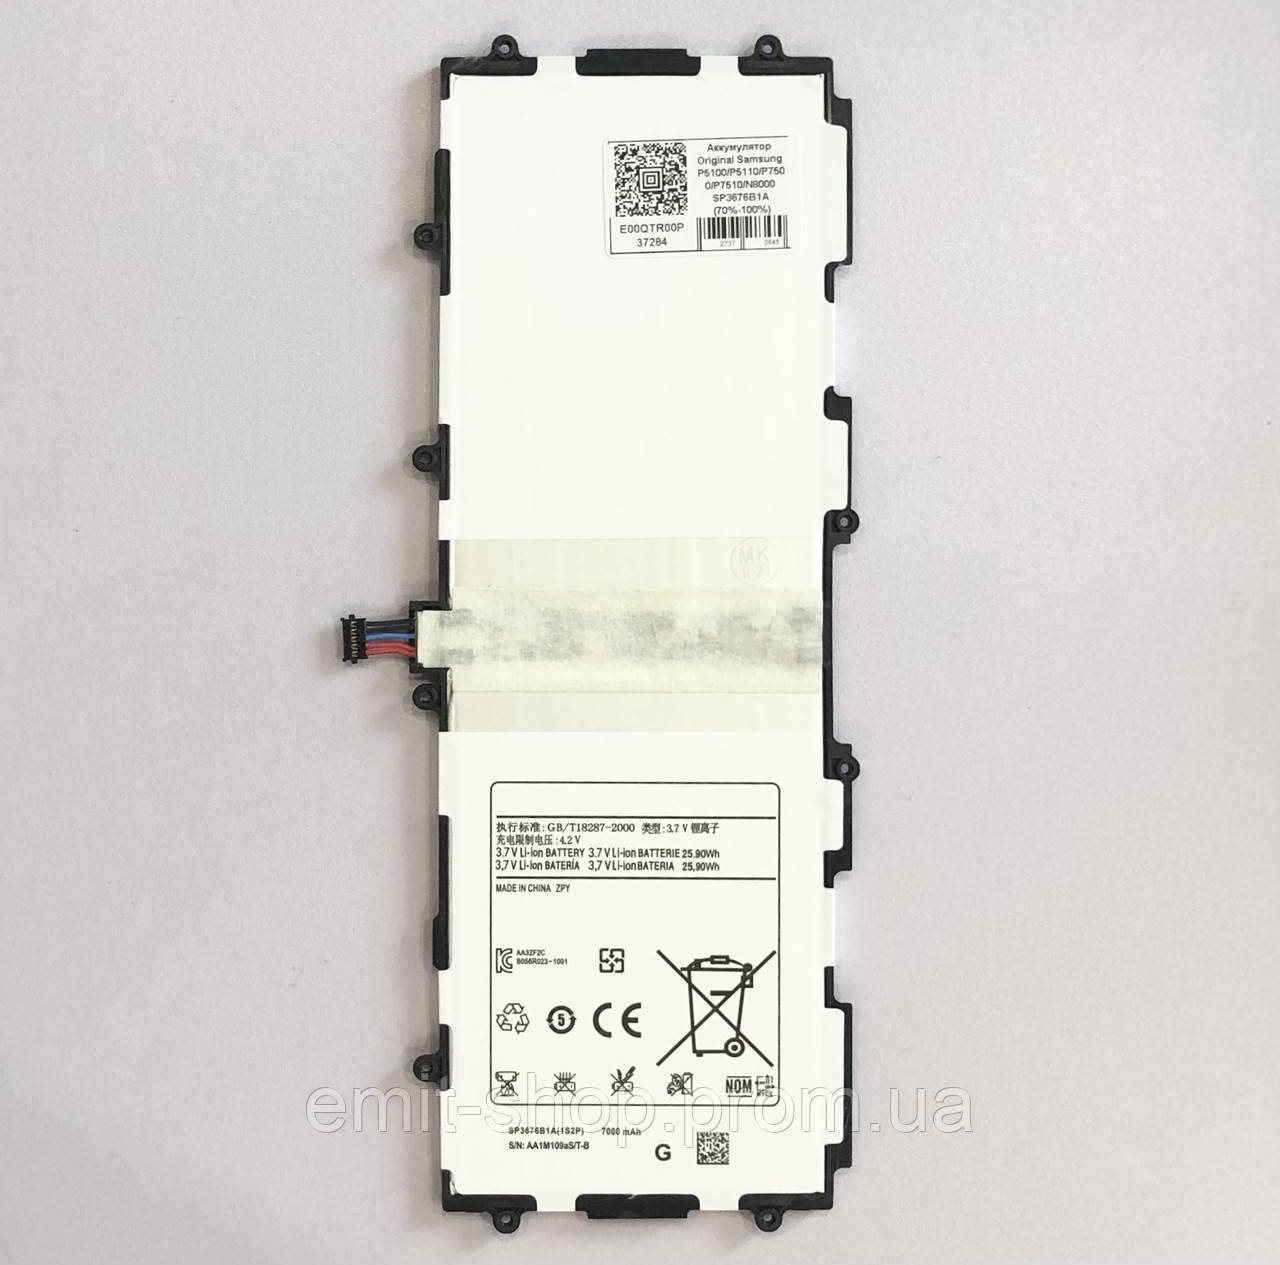 P7500 OEM Battery SP3676B1A For Samsung Galaxy Tab 2 10.1 GT-P5100 P5110 P5113 